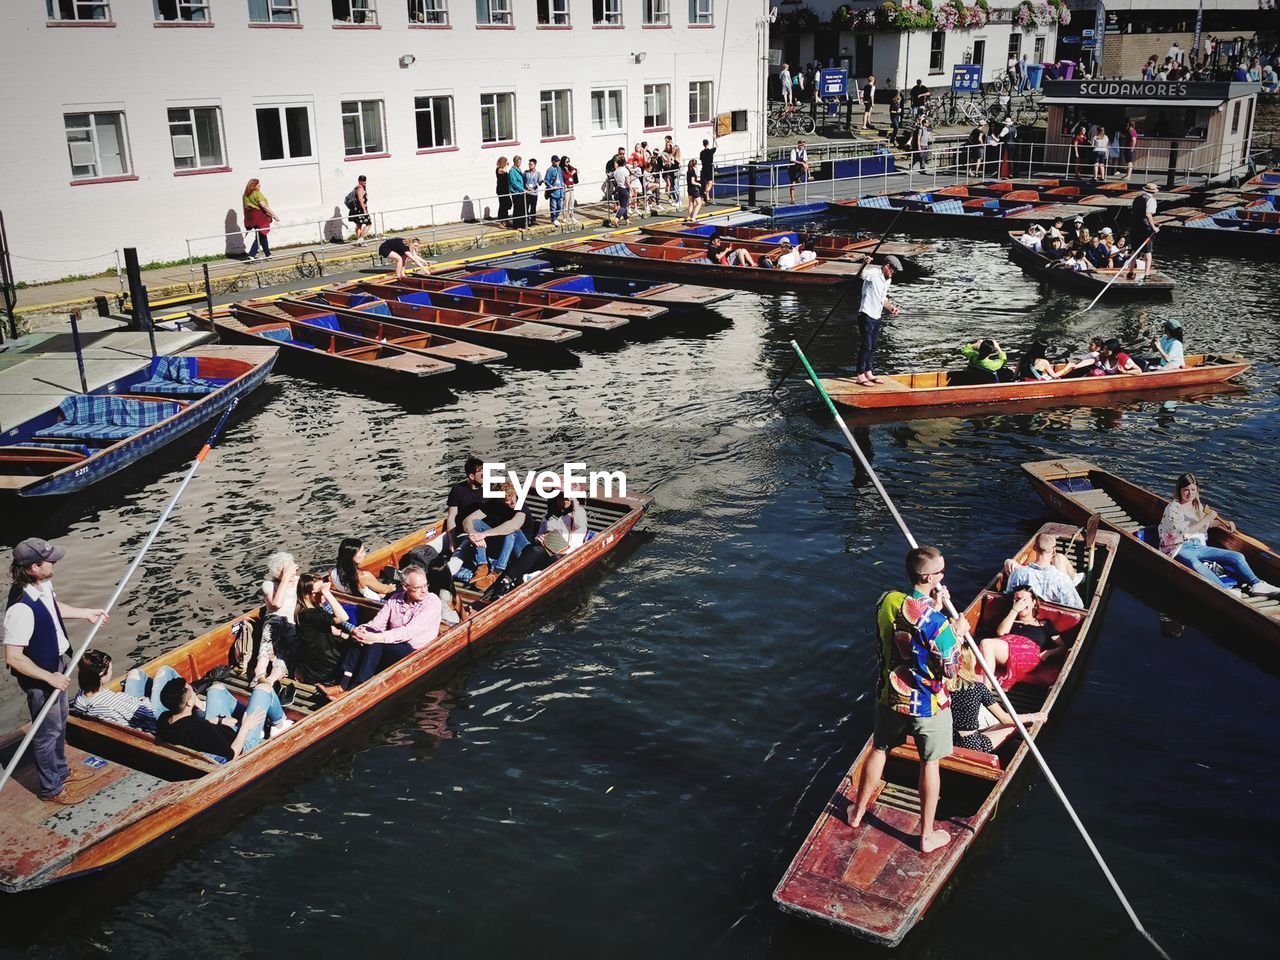 HIGH ANGLE VIEW OF PEOPLE ON BOAT IN CANAL